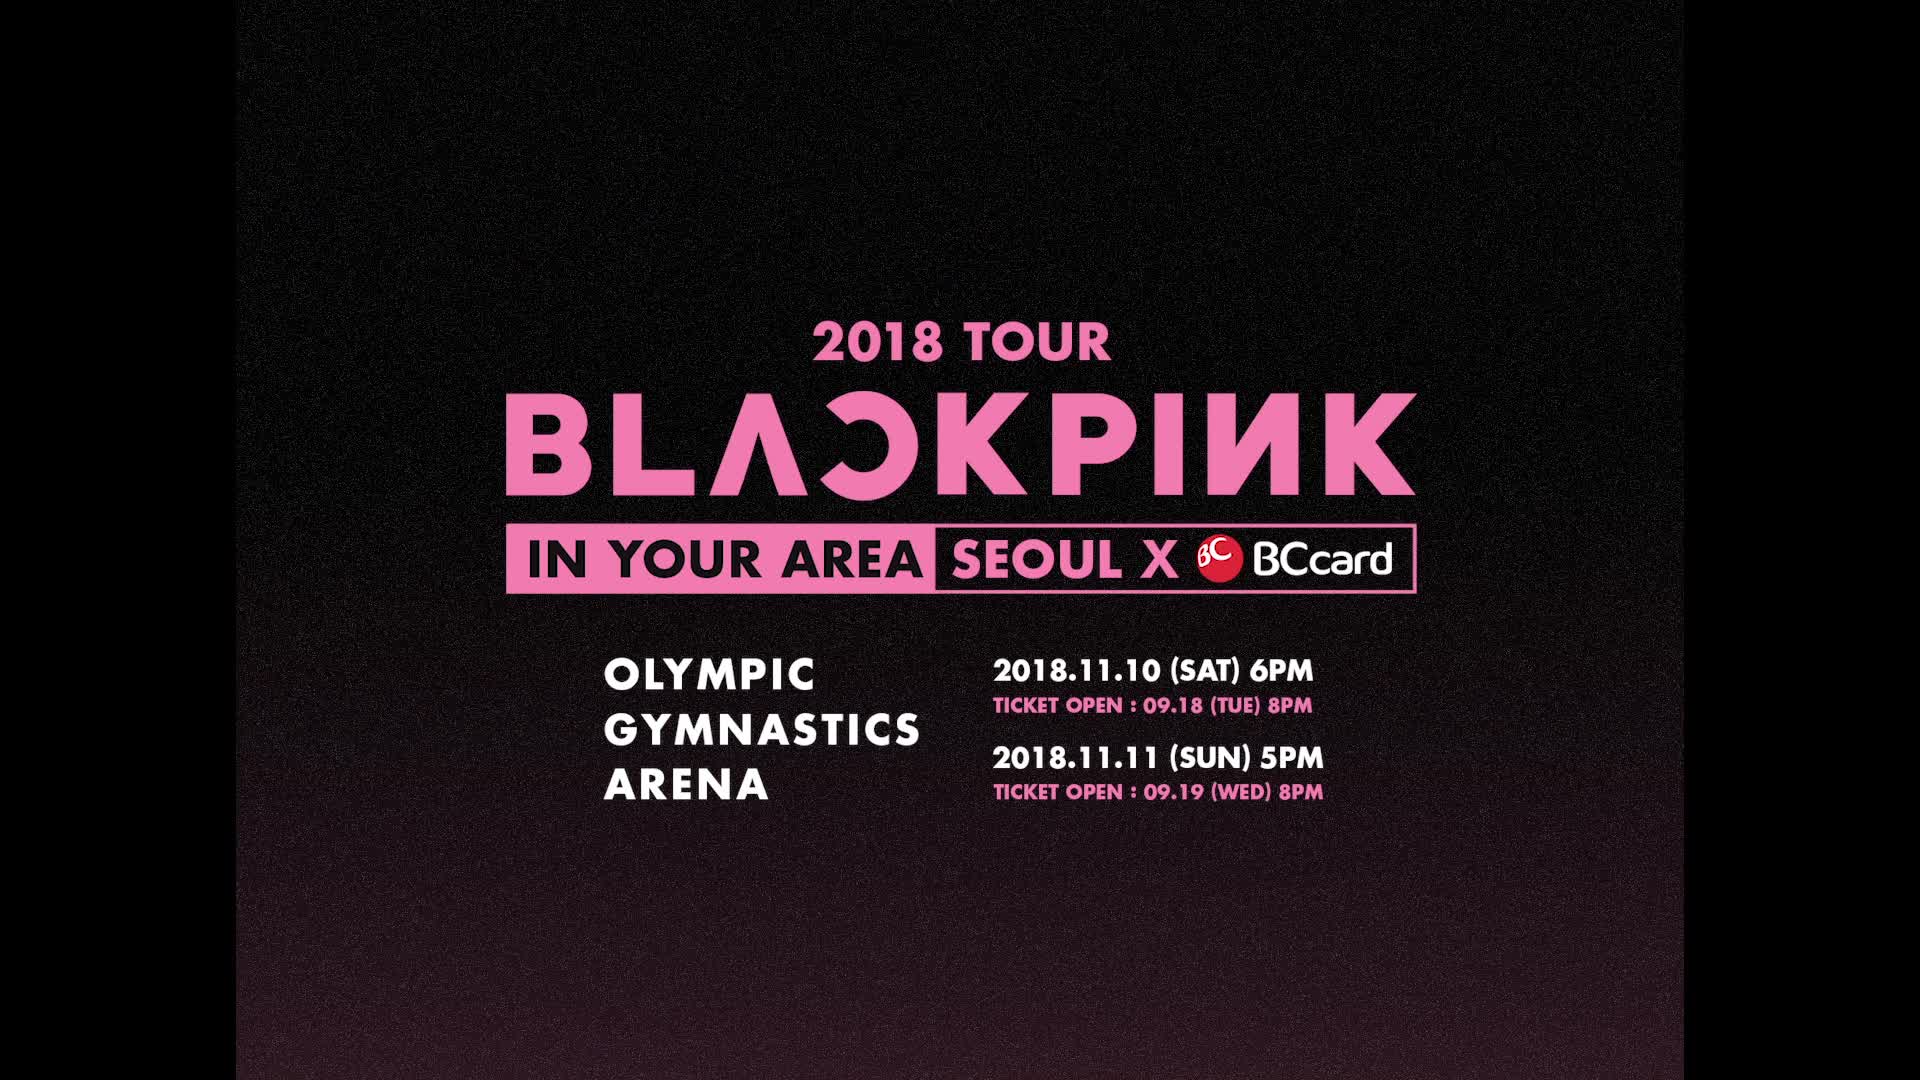 BLACKPINK - 2018 TOUR [IN YOUR AREA] SEOUL X BC CARD SPOT VIDEO 